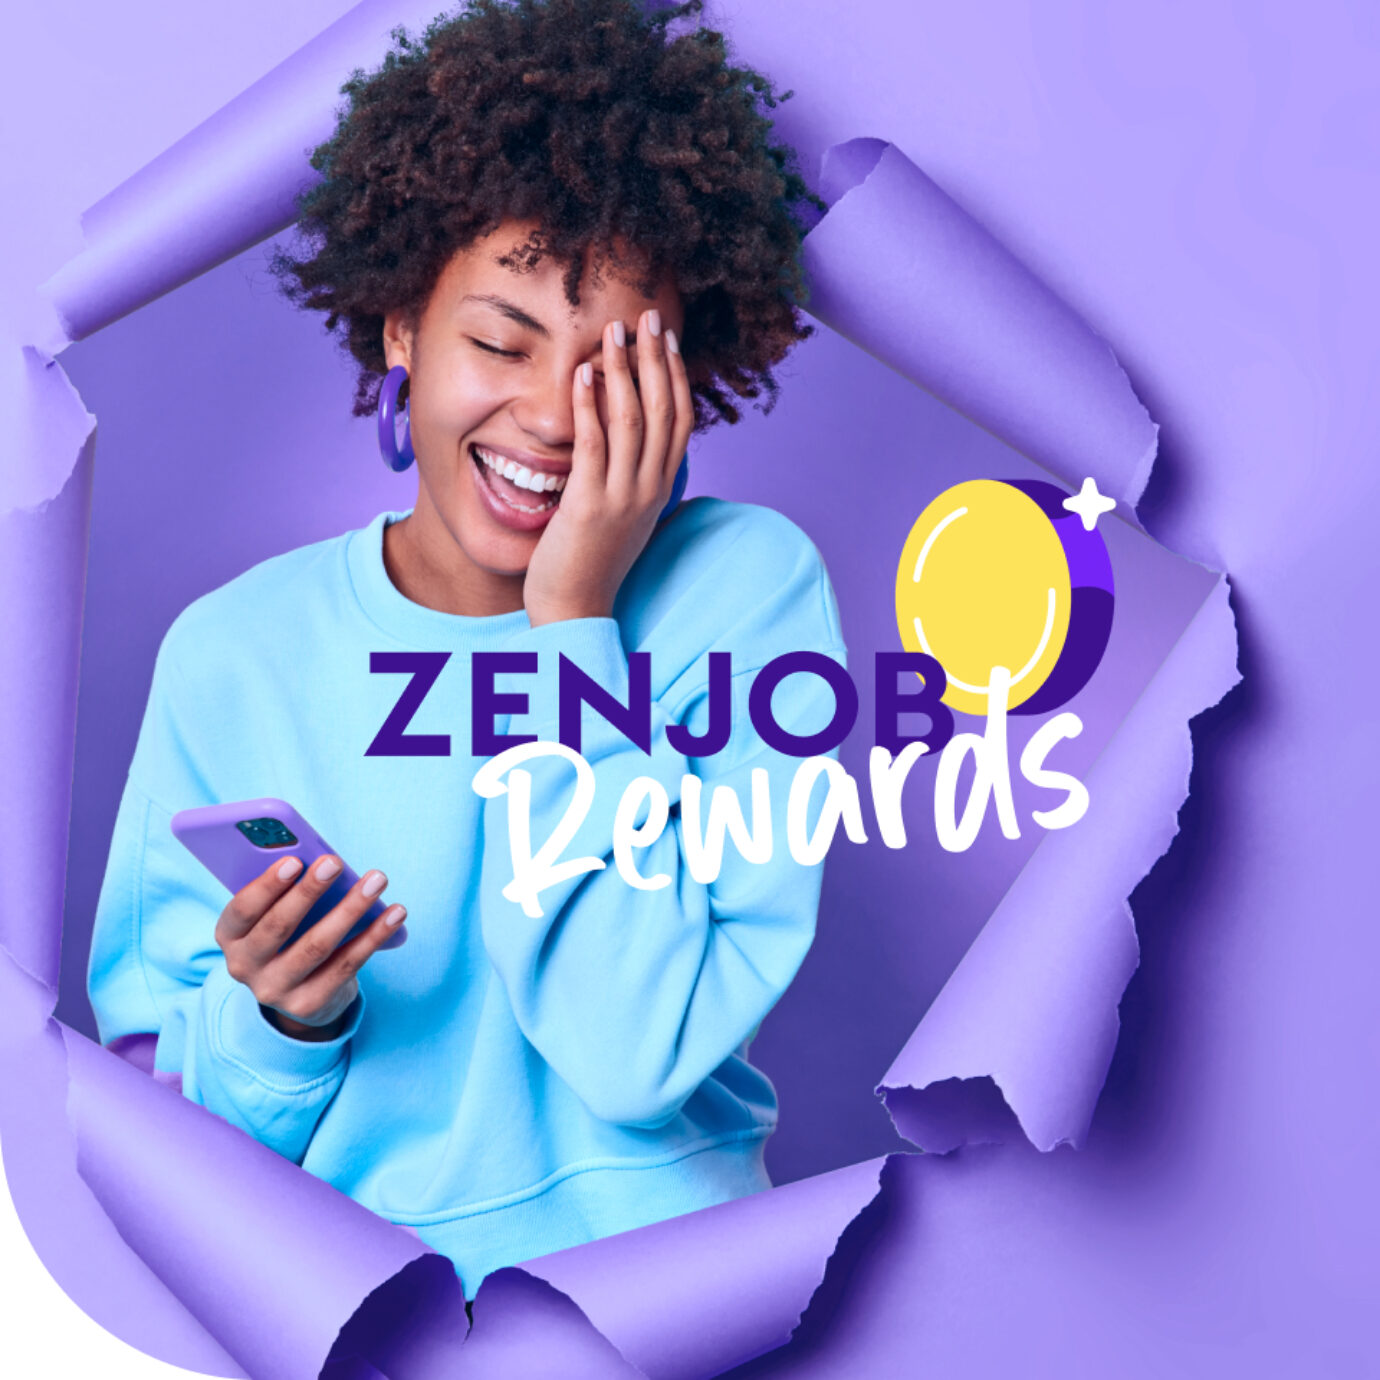 Zenjob Rewards header image with a woman smiling and being happy about collecting points in her app.